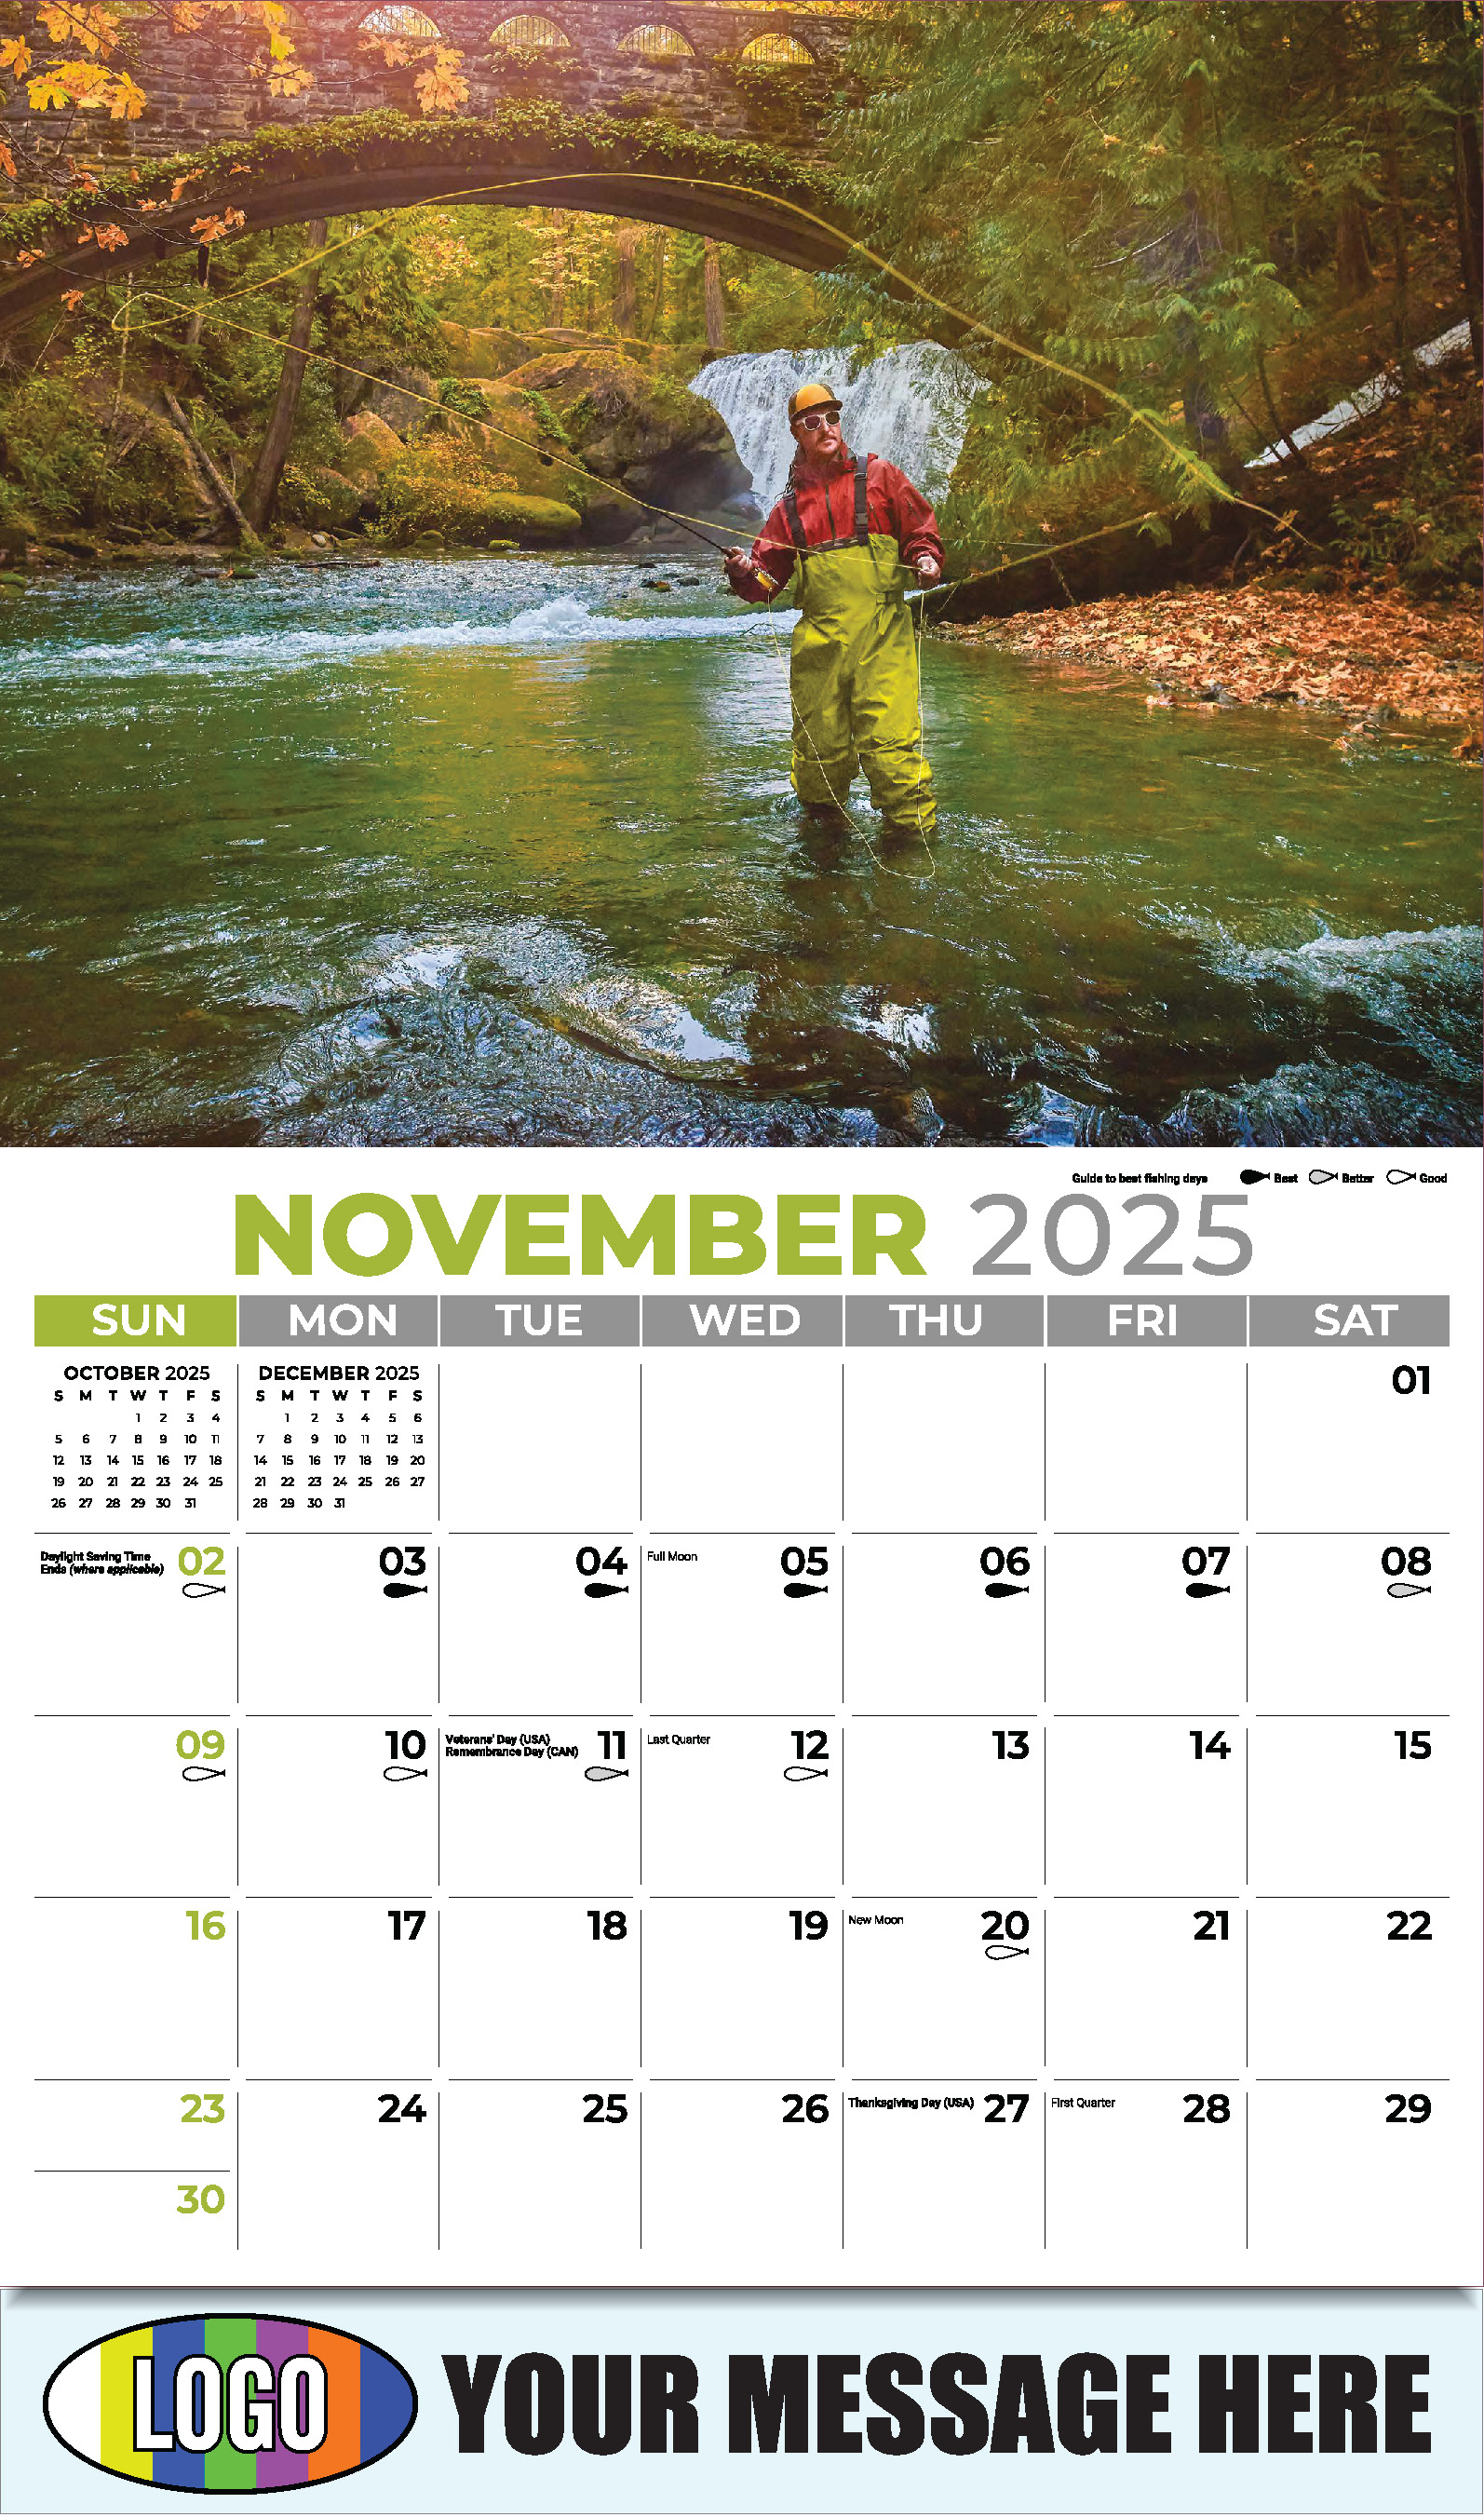 Fishing and Hunting 2025 Business Promotion Calendar - November